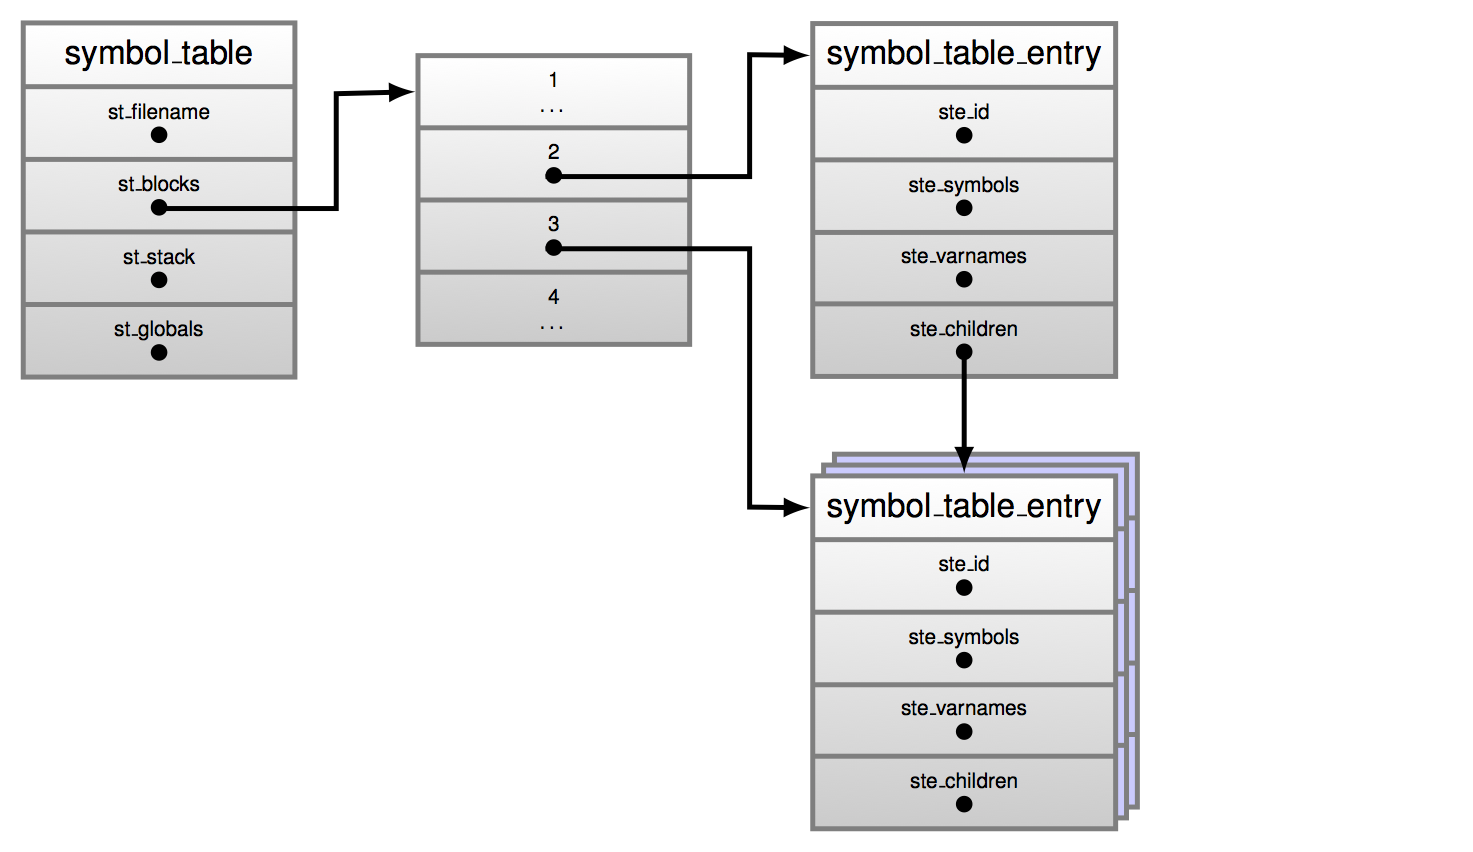 Figure 3.1: A Symbol table and symbol table entries.